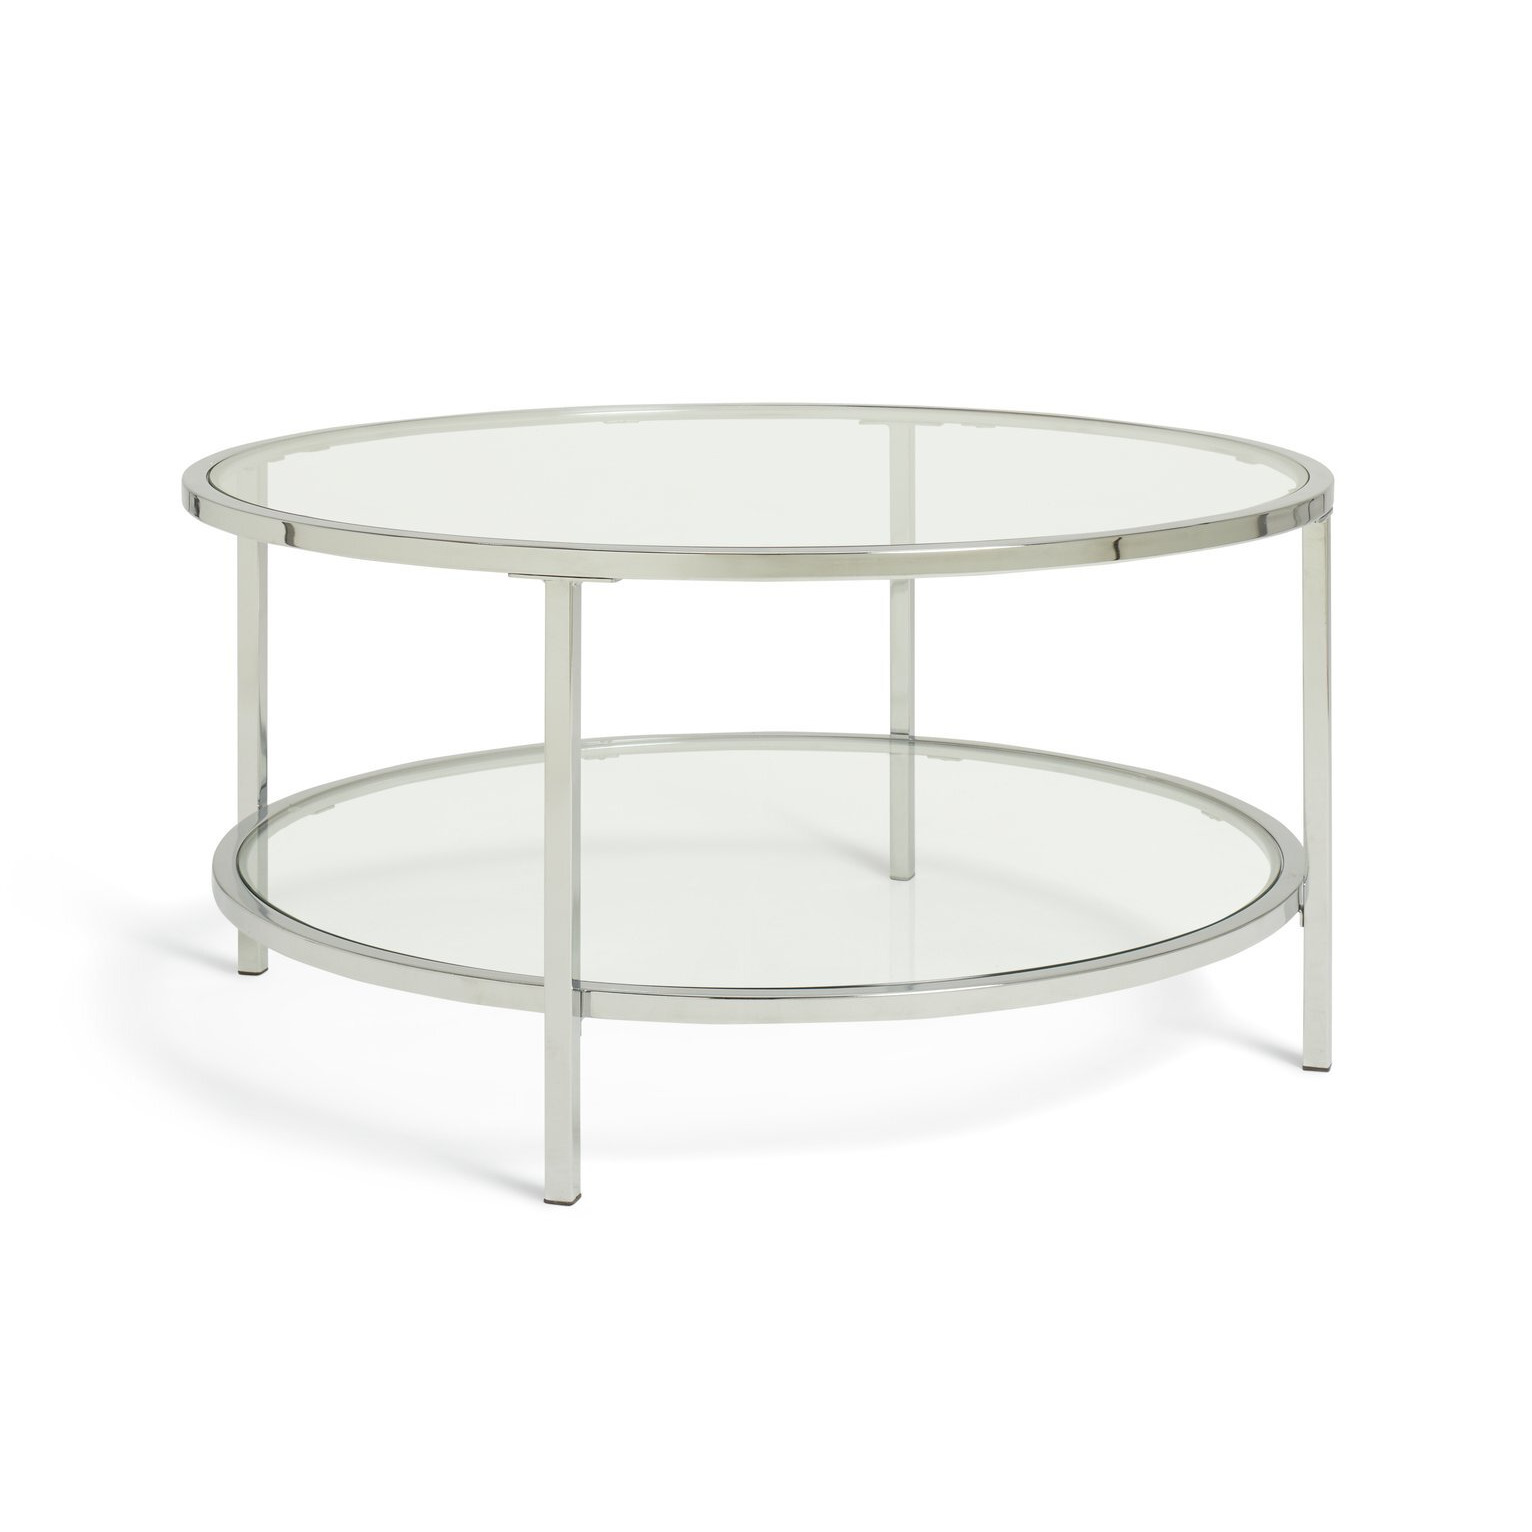 Argos Home Boutique Round Coffee Table - Silver - image 1